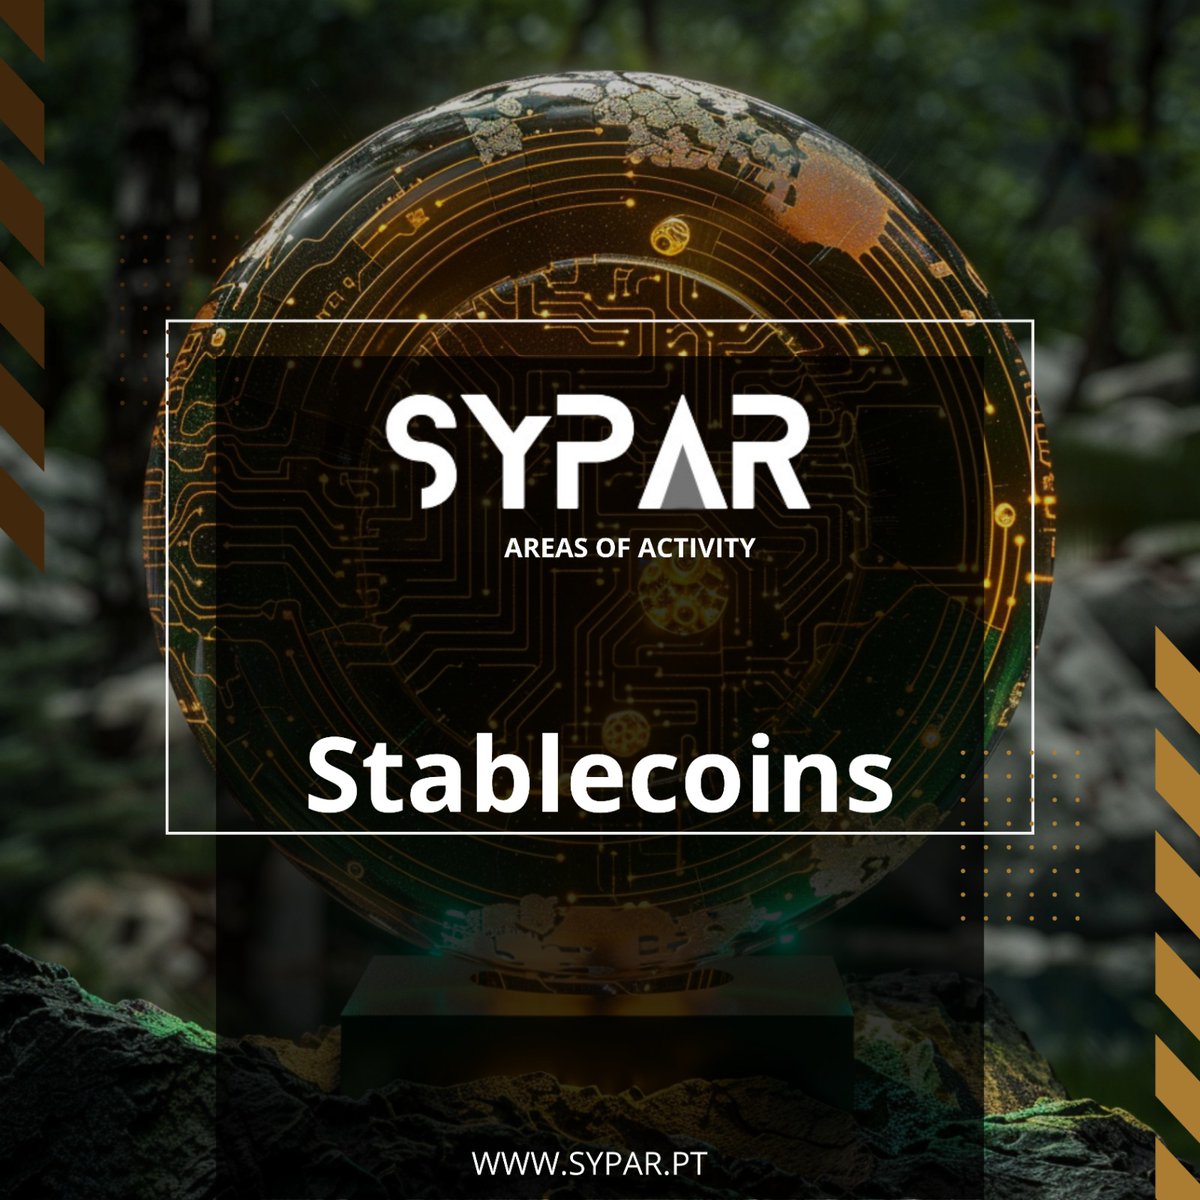 Within the broad concept of #cryptoassets, '#stablecoins' are identified, primarily serving #monetary functions and characterized by value stability linked to real-world assets like the #euro or #dollar. The European legislator divides #stablecoins into #ARTs and #EMTs.